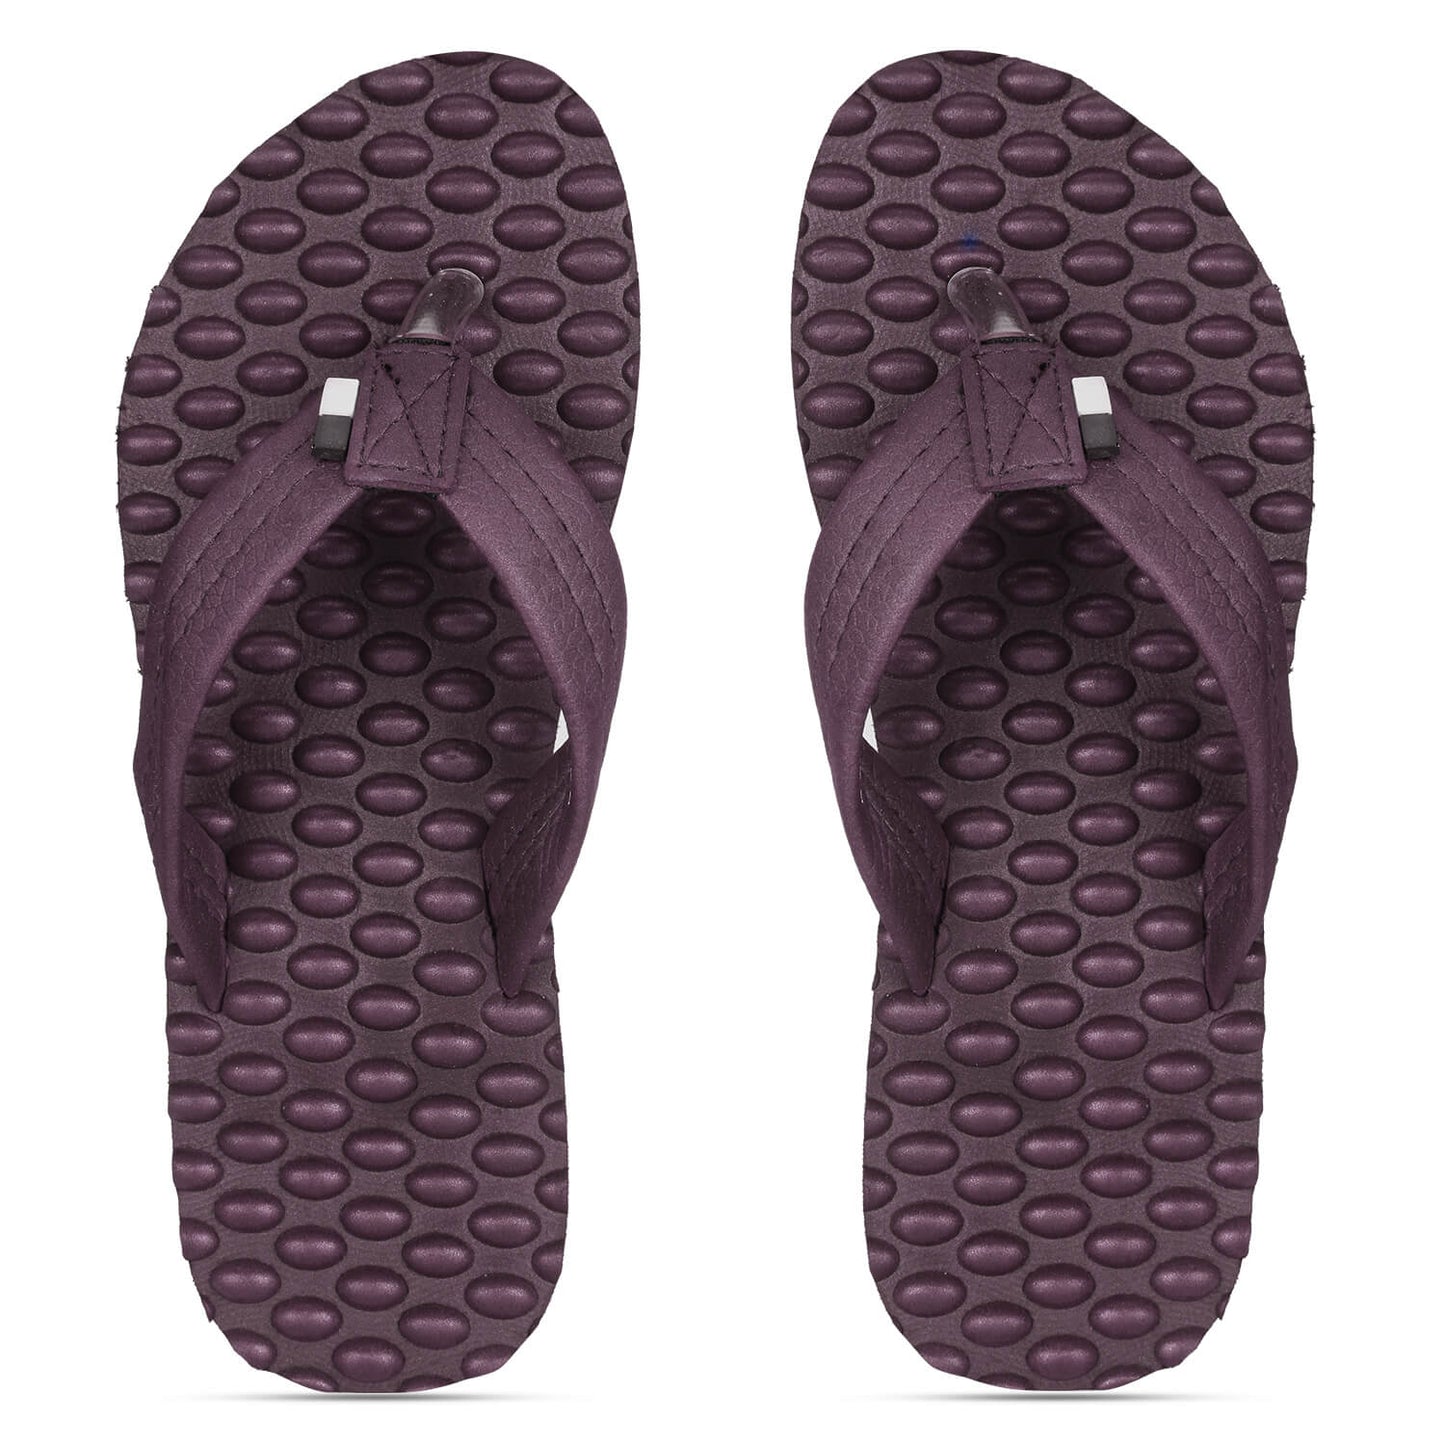 DOCTOR EXTRA SOFT D-20 Women's Bubble Softy Slippers, Stylish Lightweight For Every Day Use, House & Bathroom Slippers